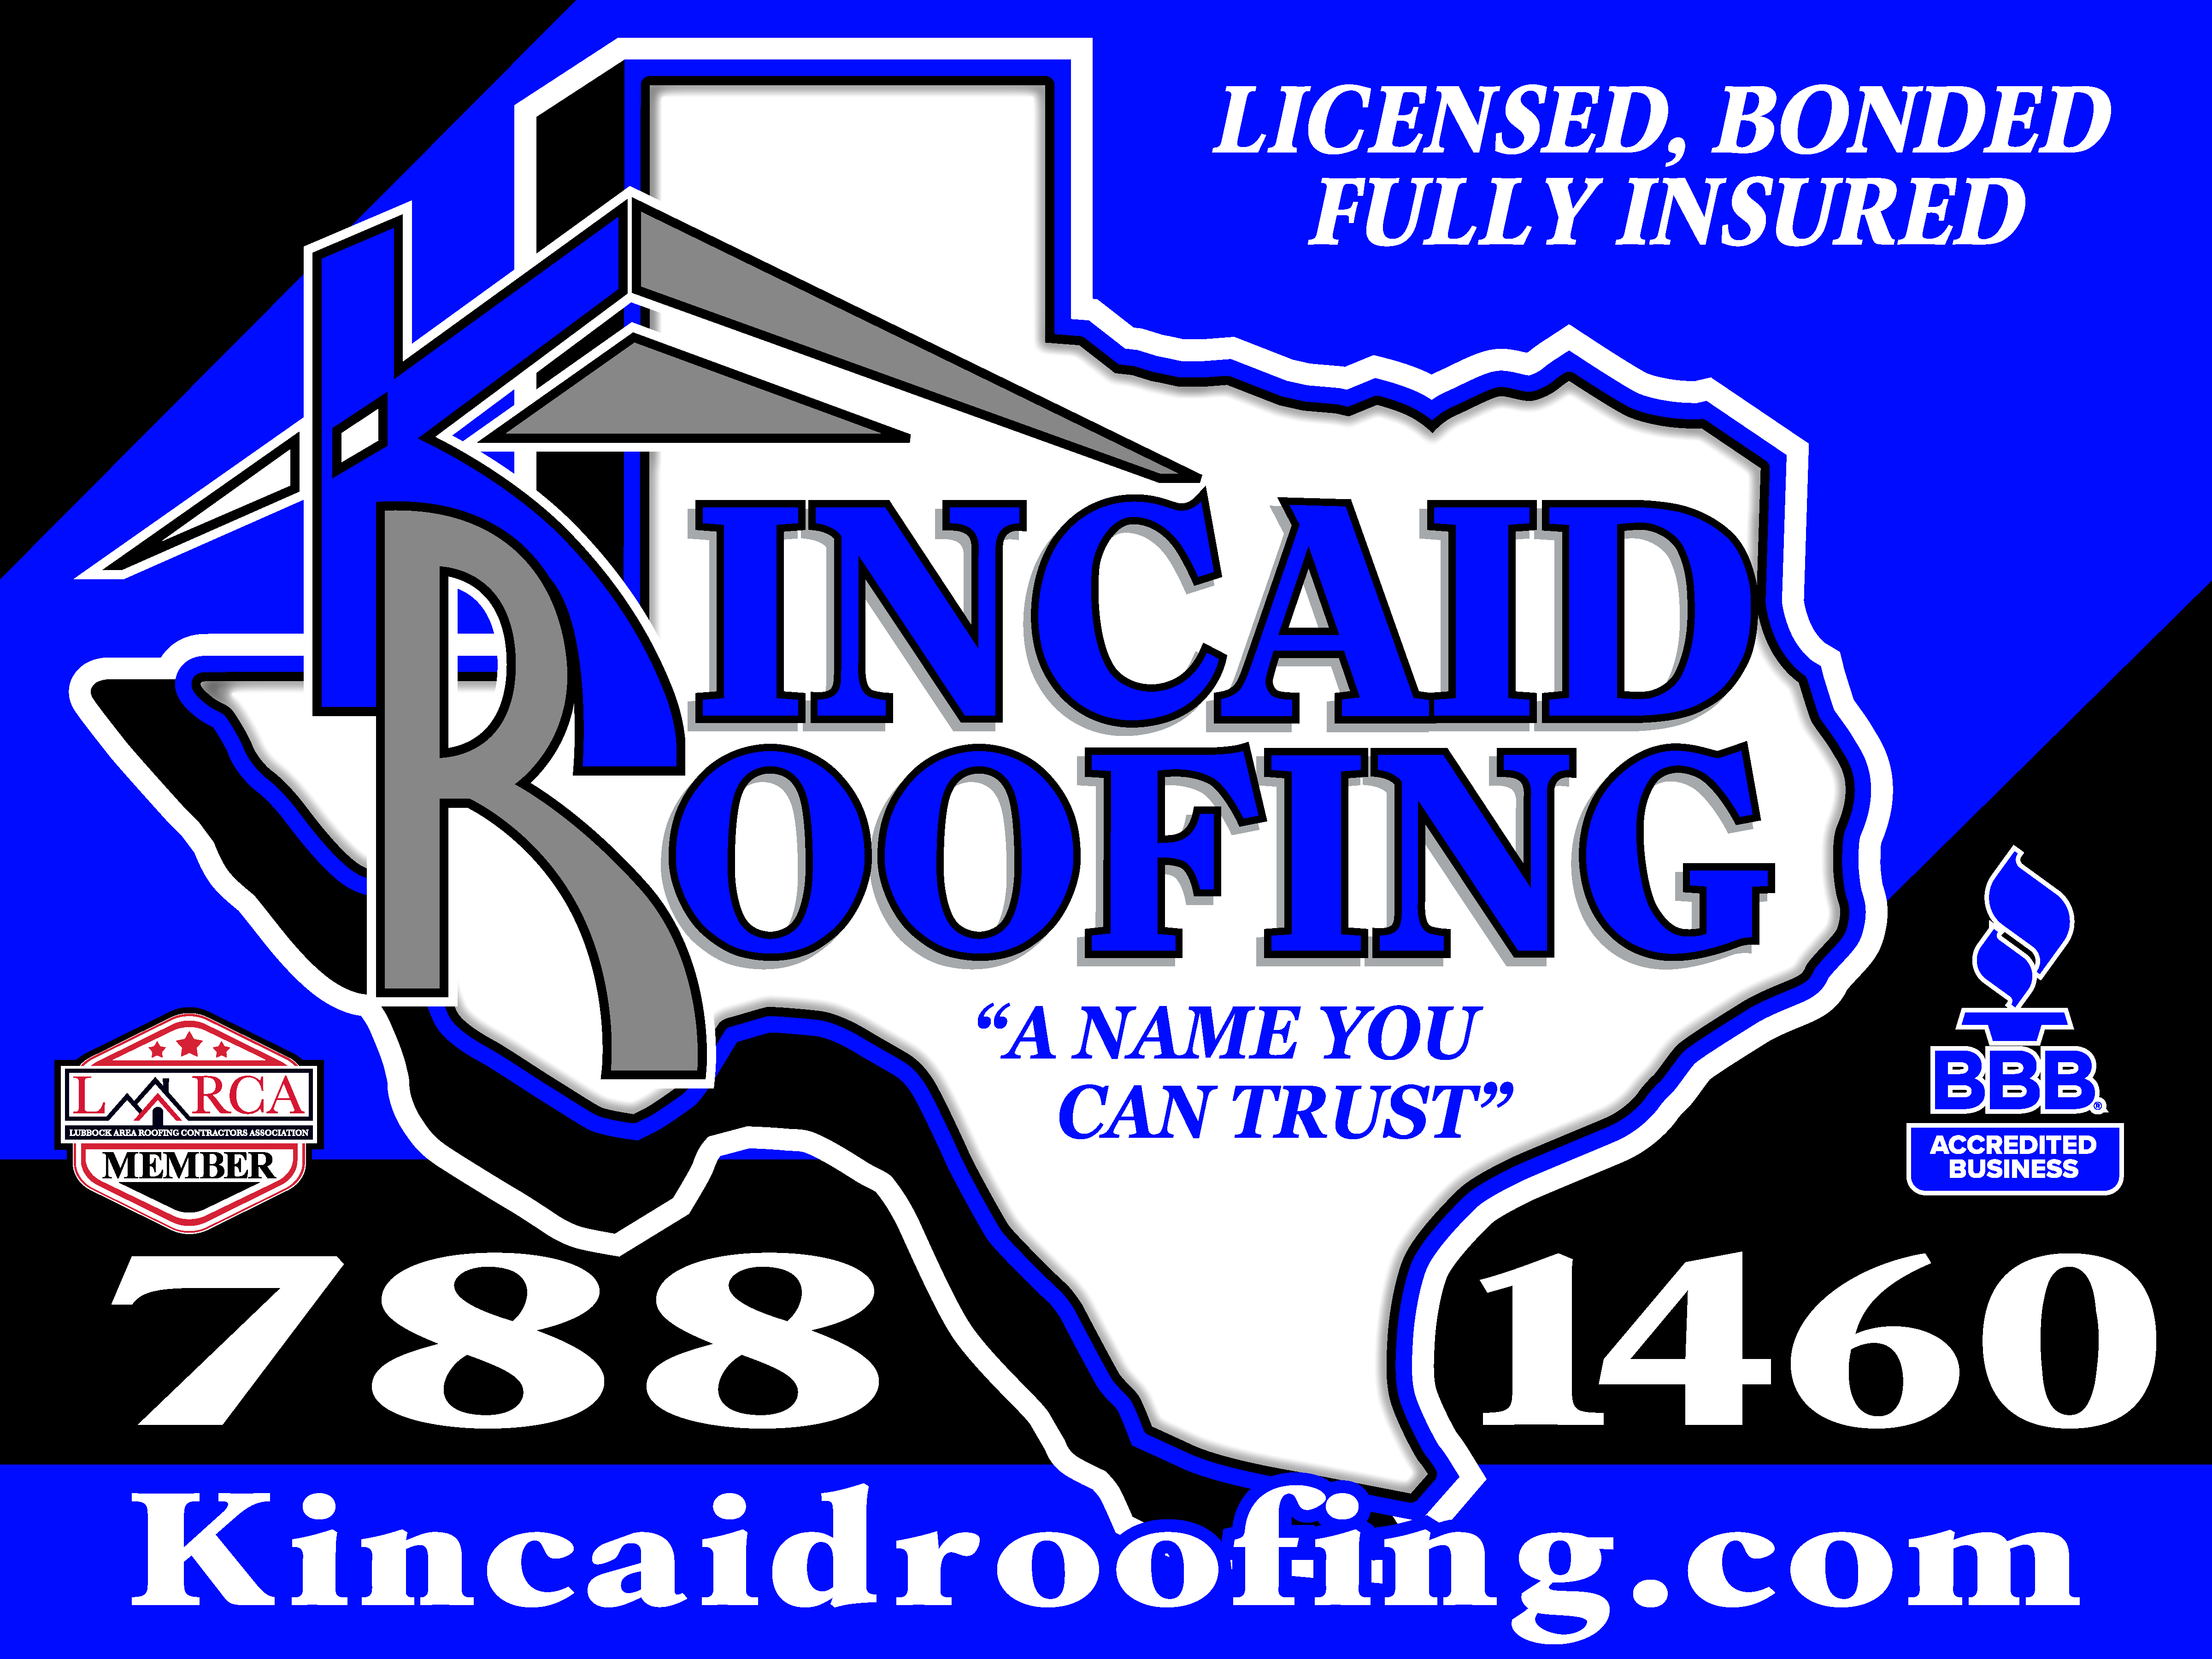 Kincaid Roofing & Remodeling, L.P.